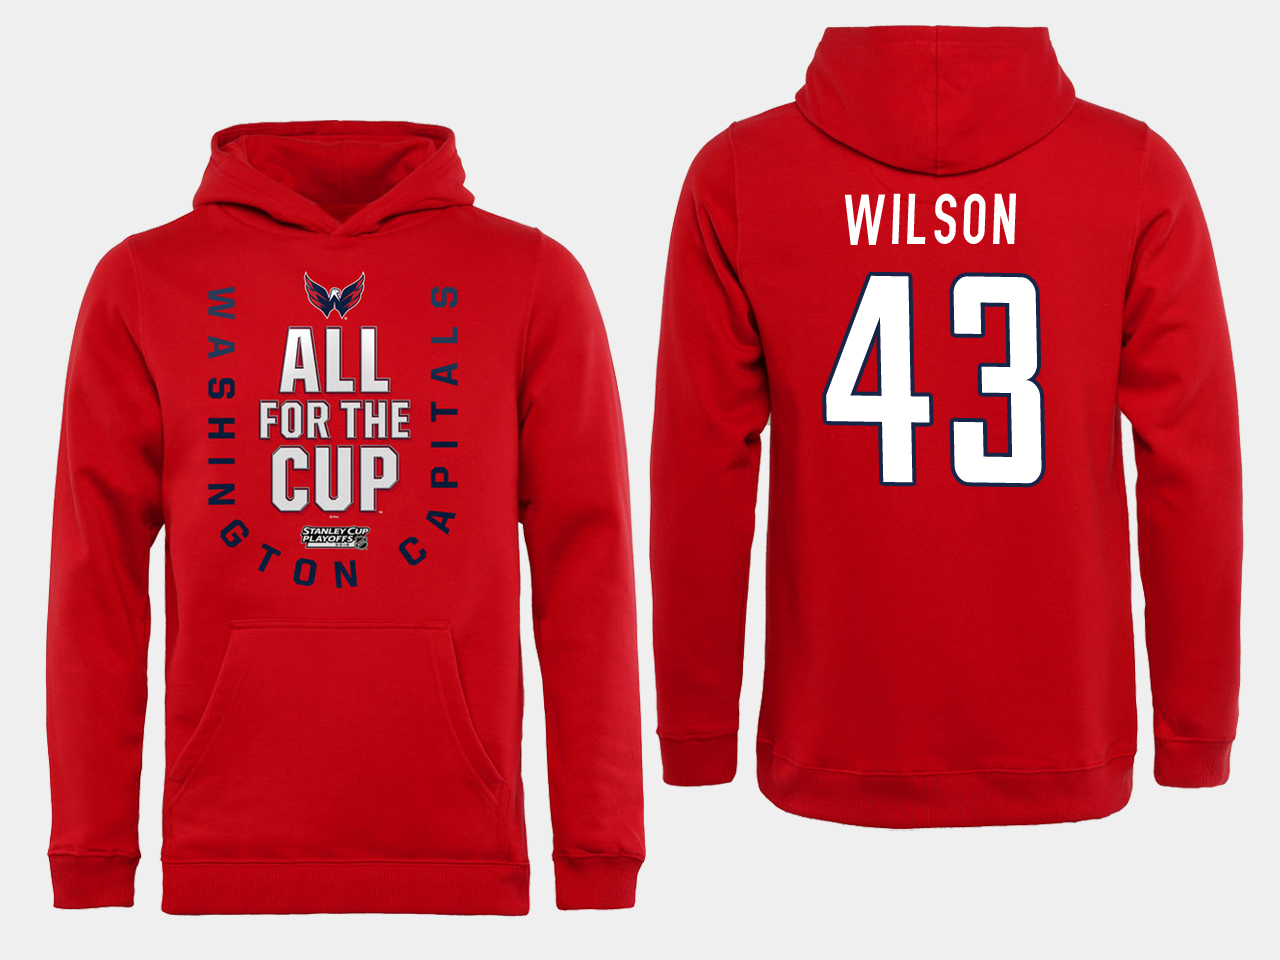 Men NHL Washington Capitals #43 Wilson Red All for the Cup Hoodie->washington capitals->NHL Jersey